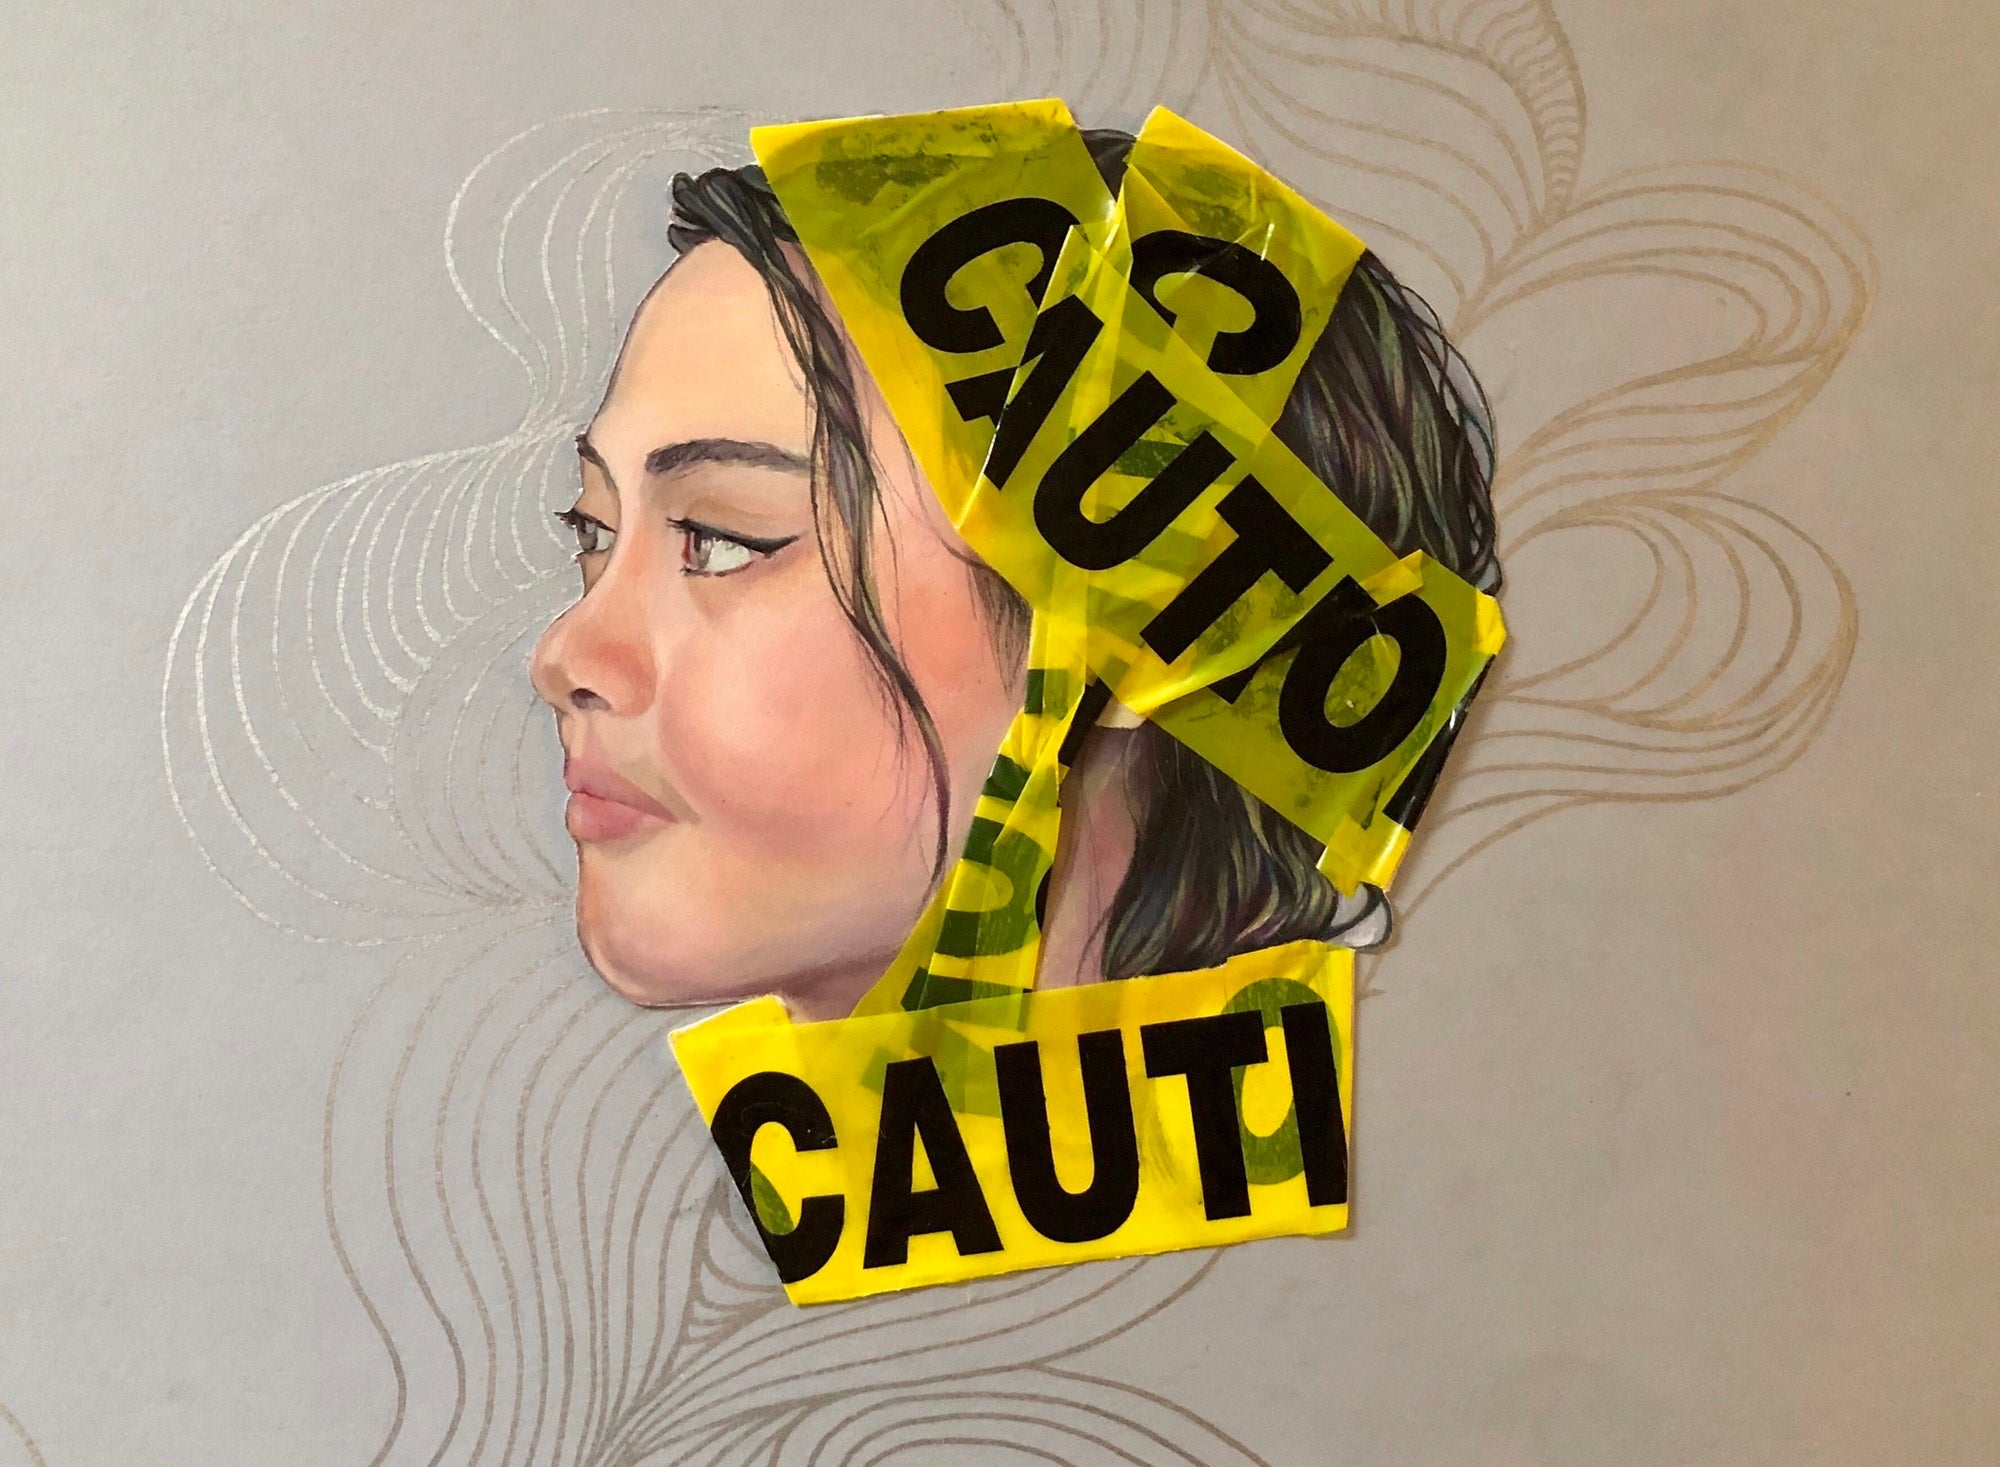 Color pencil portrait of a woman's face wrapped in caution tape